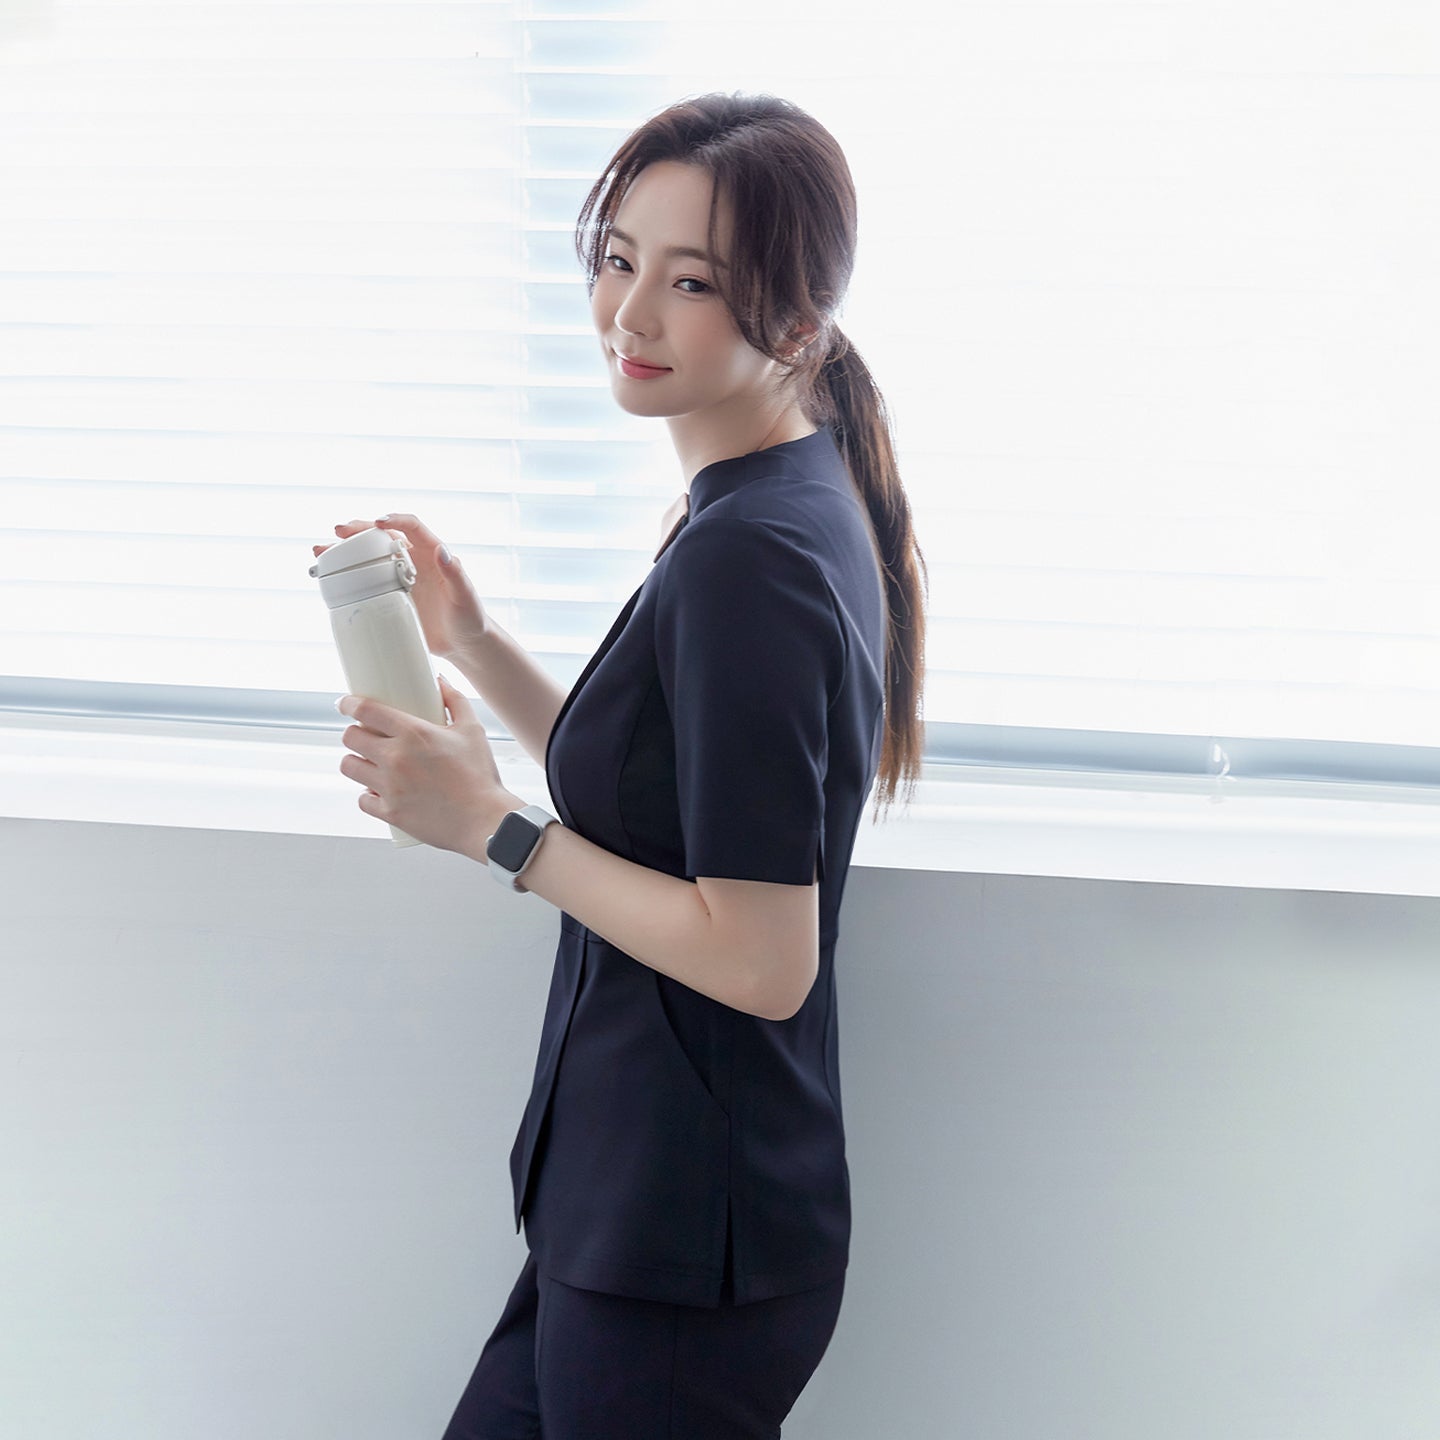 A woman in a navy round-neck front zipper top and matching pants, standing by a window, holding a white tumbler, and wearing a smartwatch,Navy